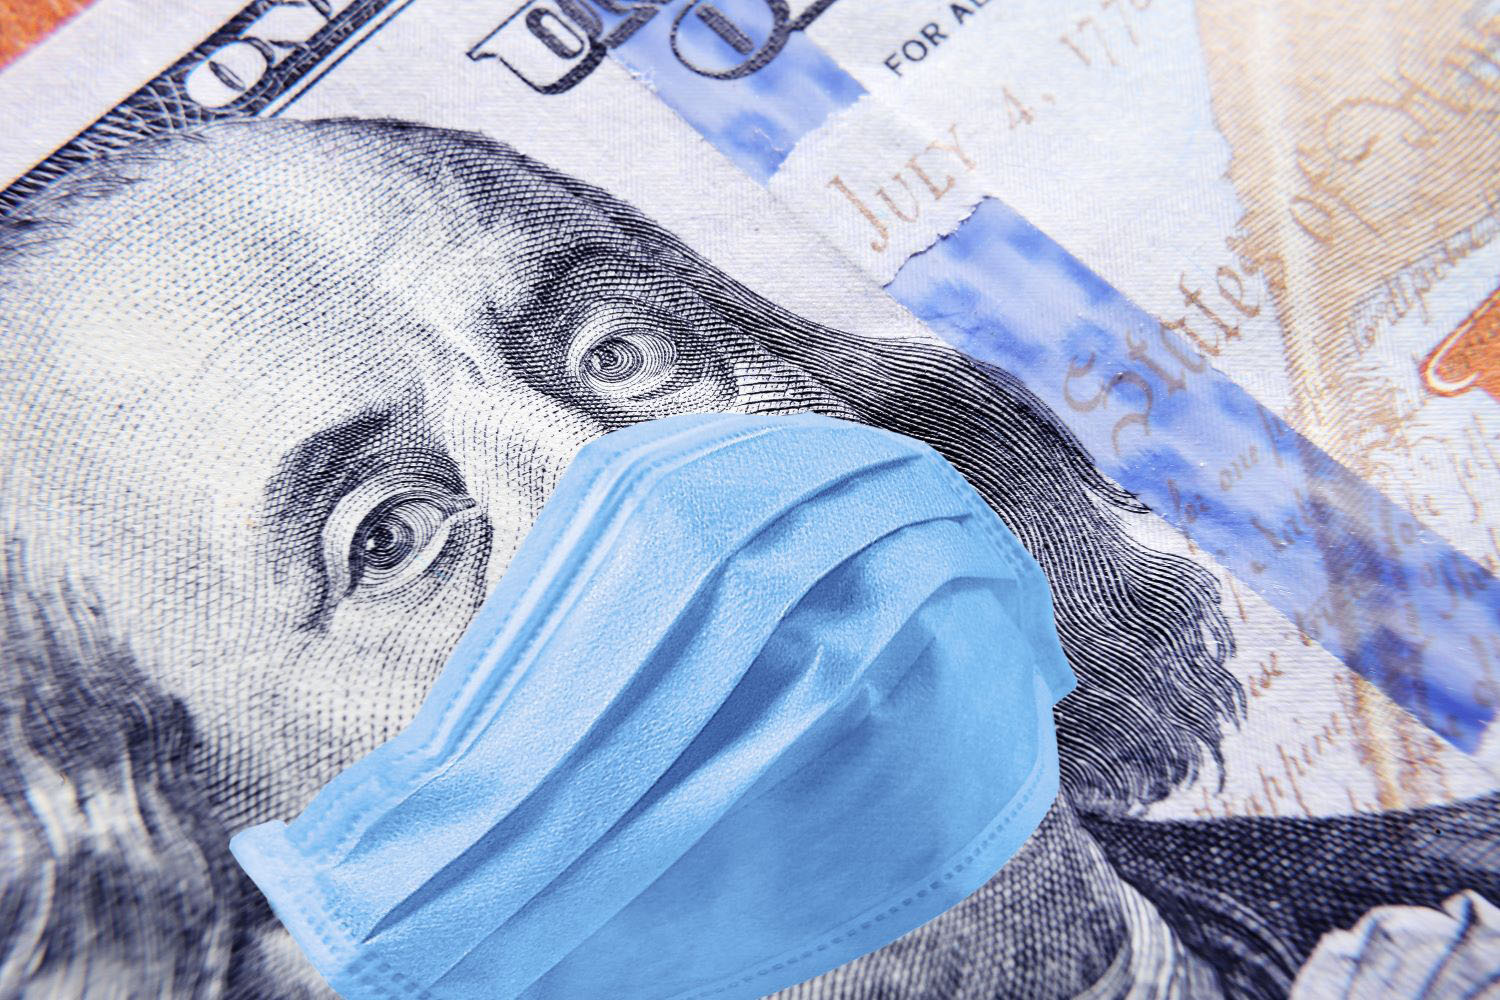 100 dollar banknote with a face mask against CoV infection.